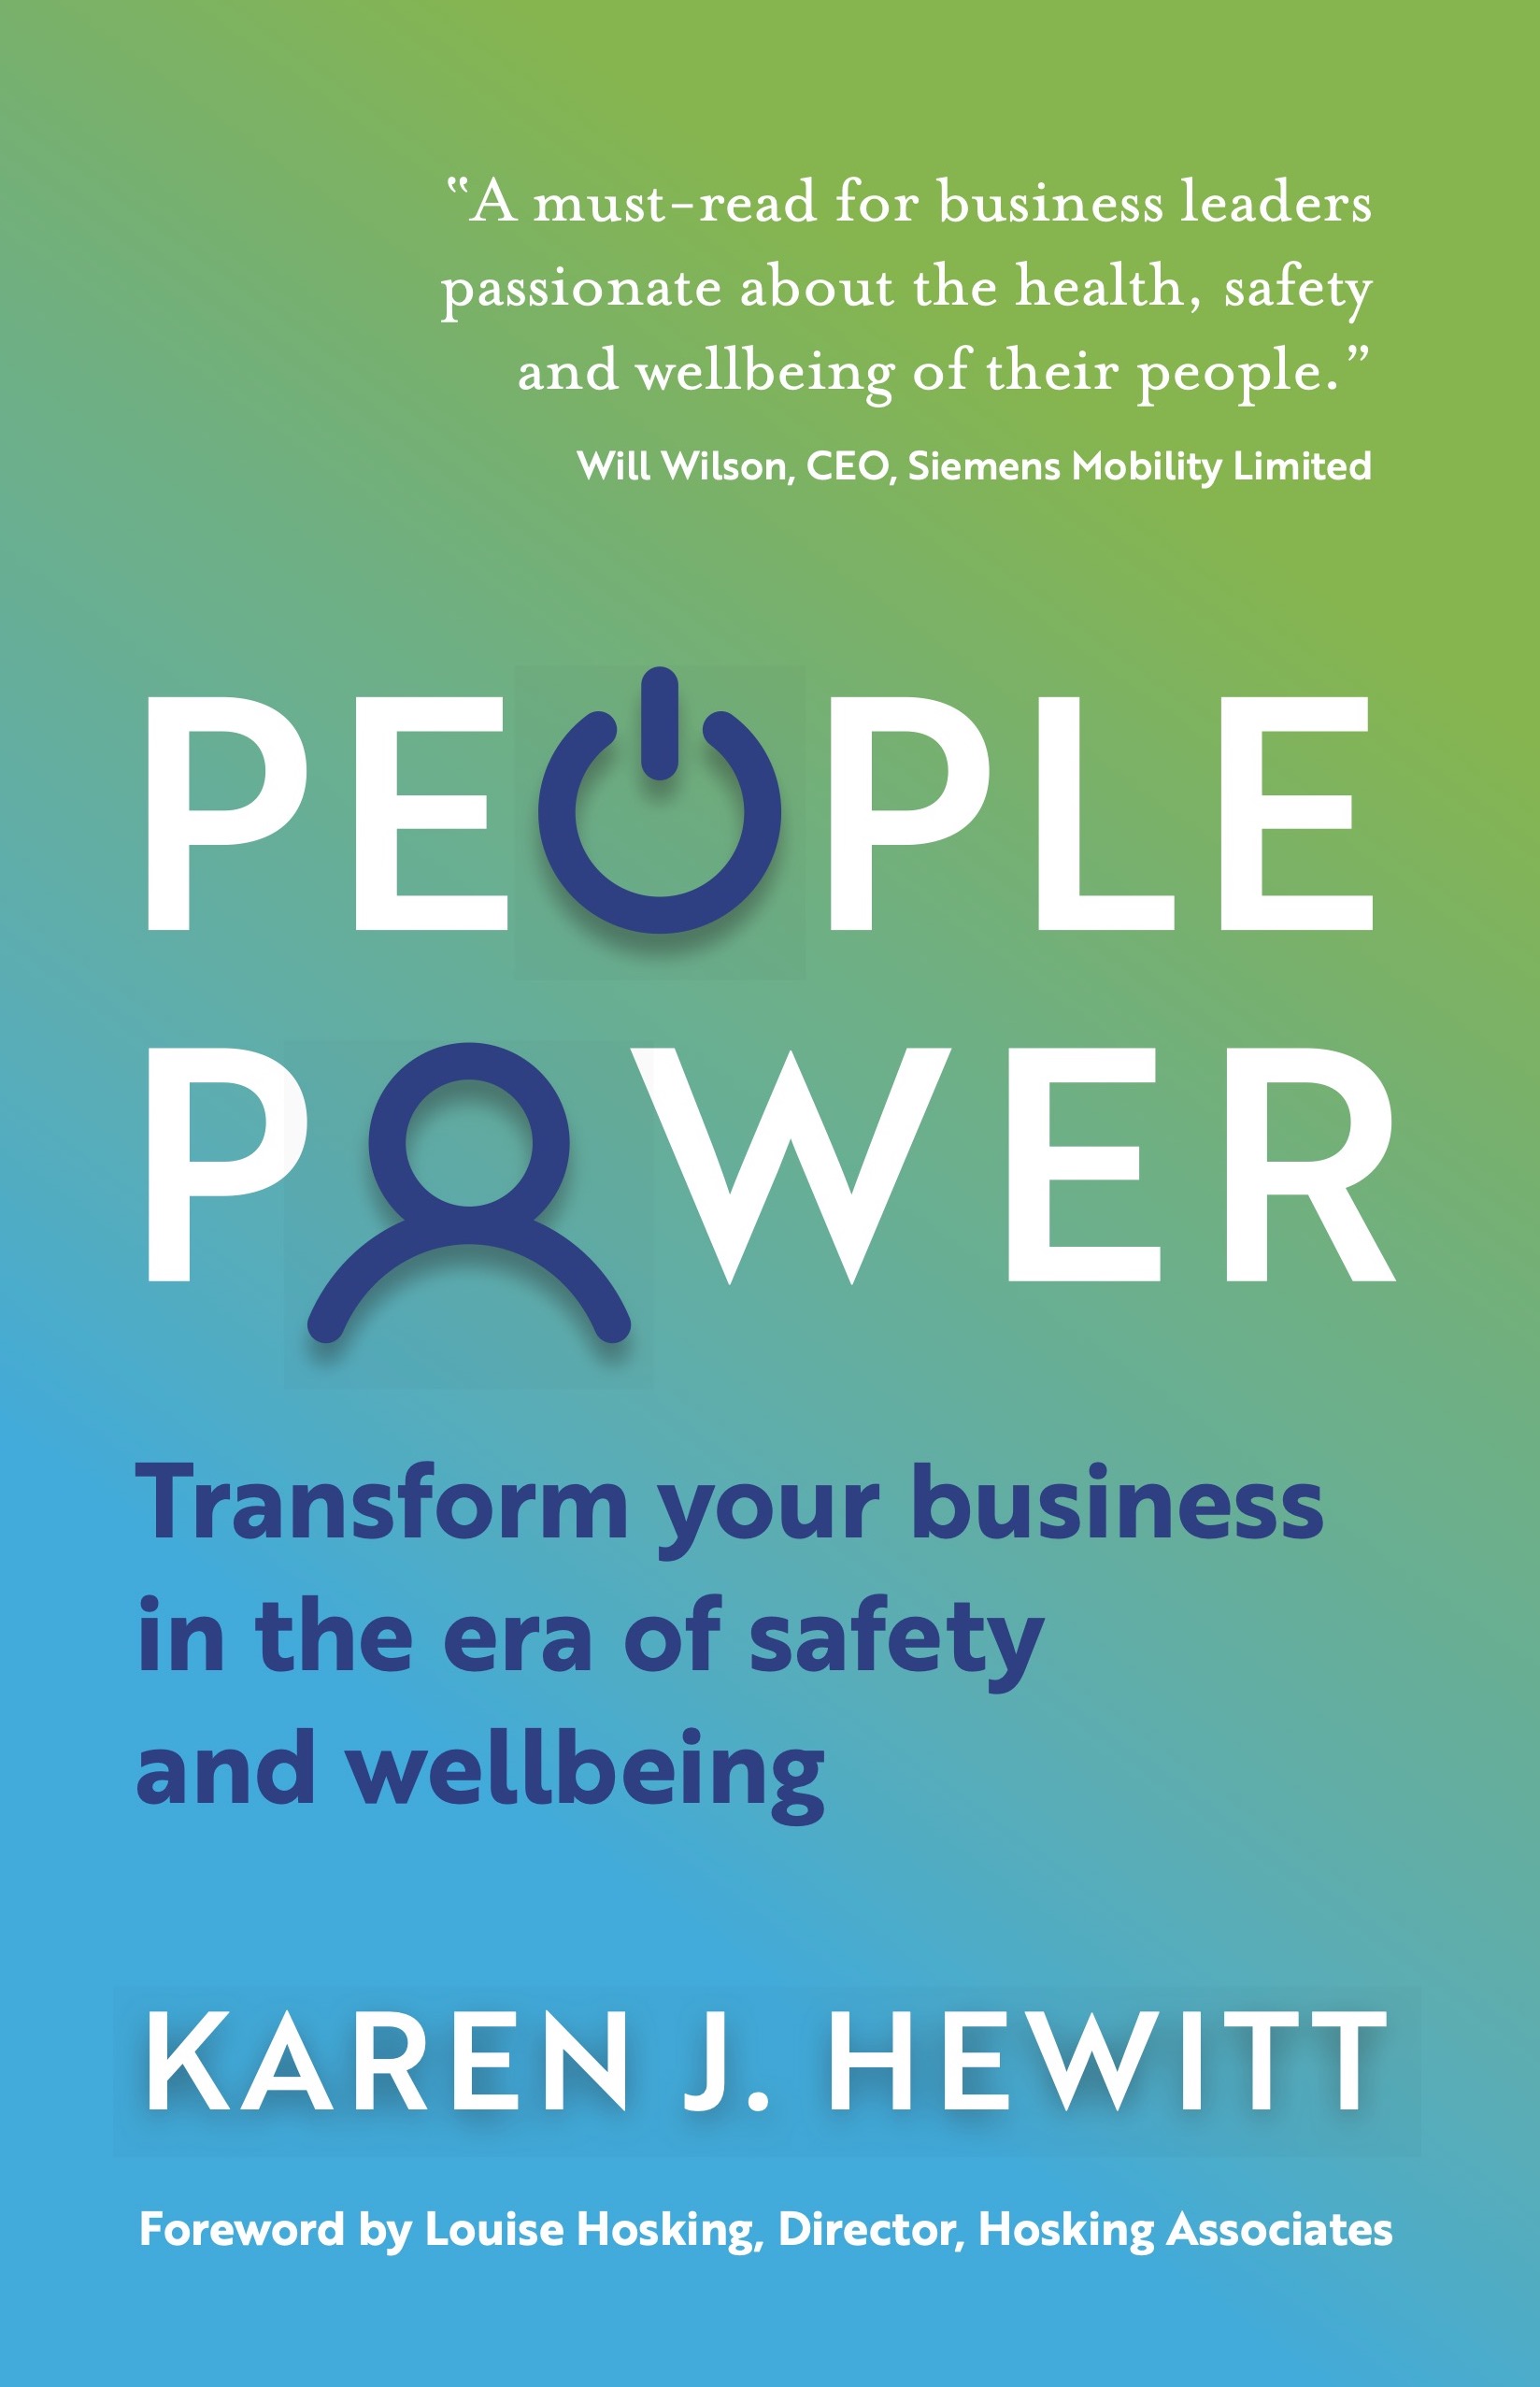 People Power book cover